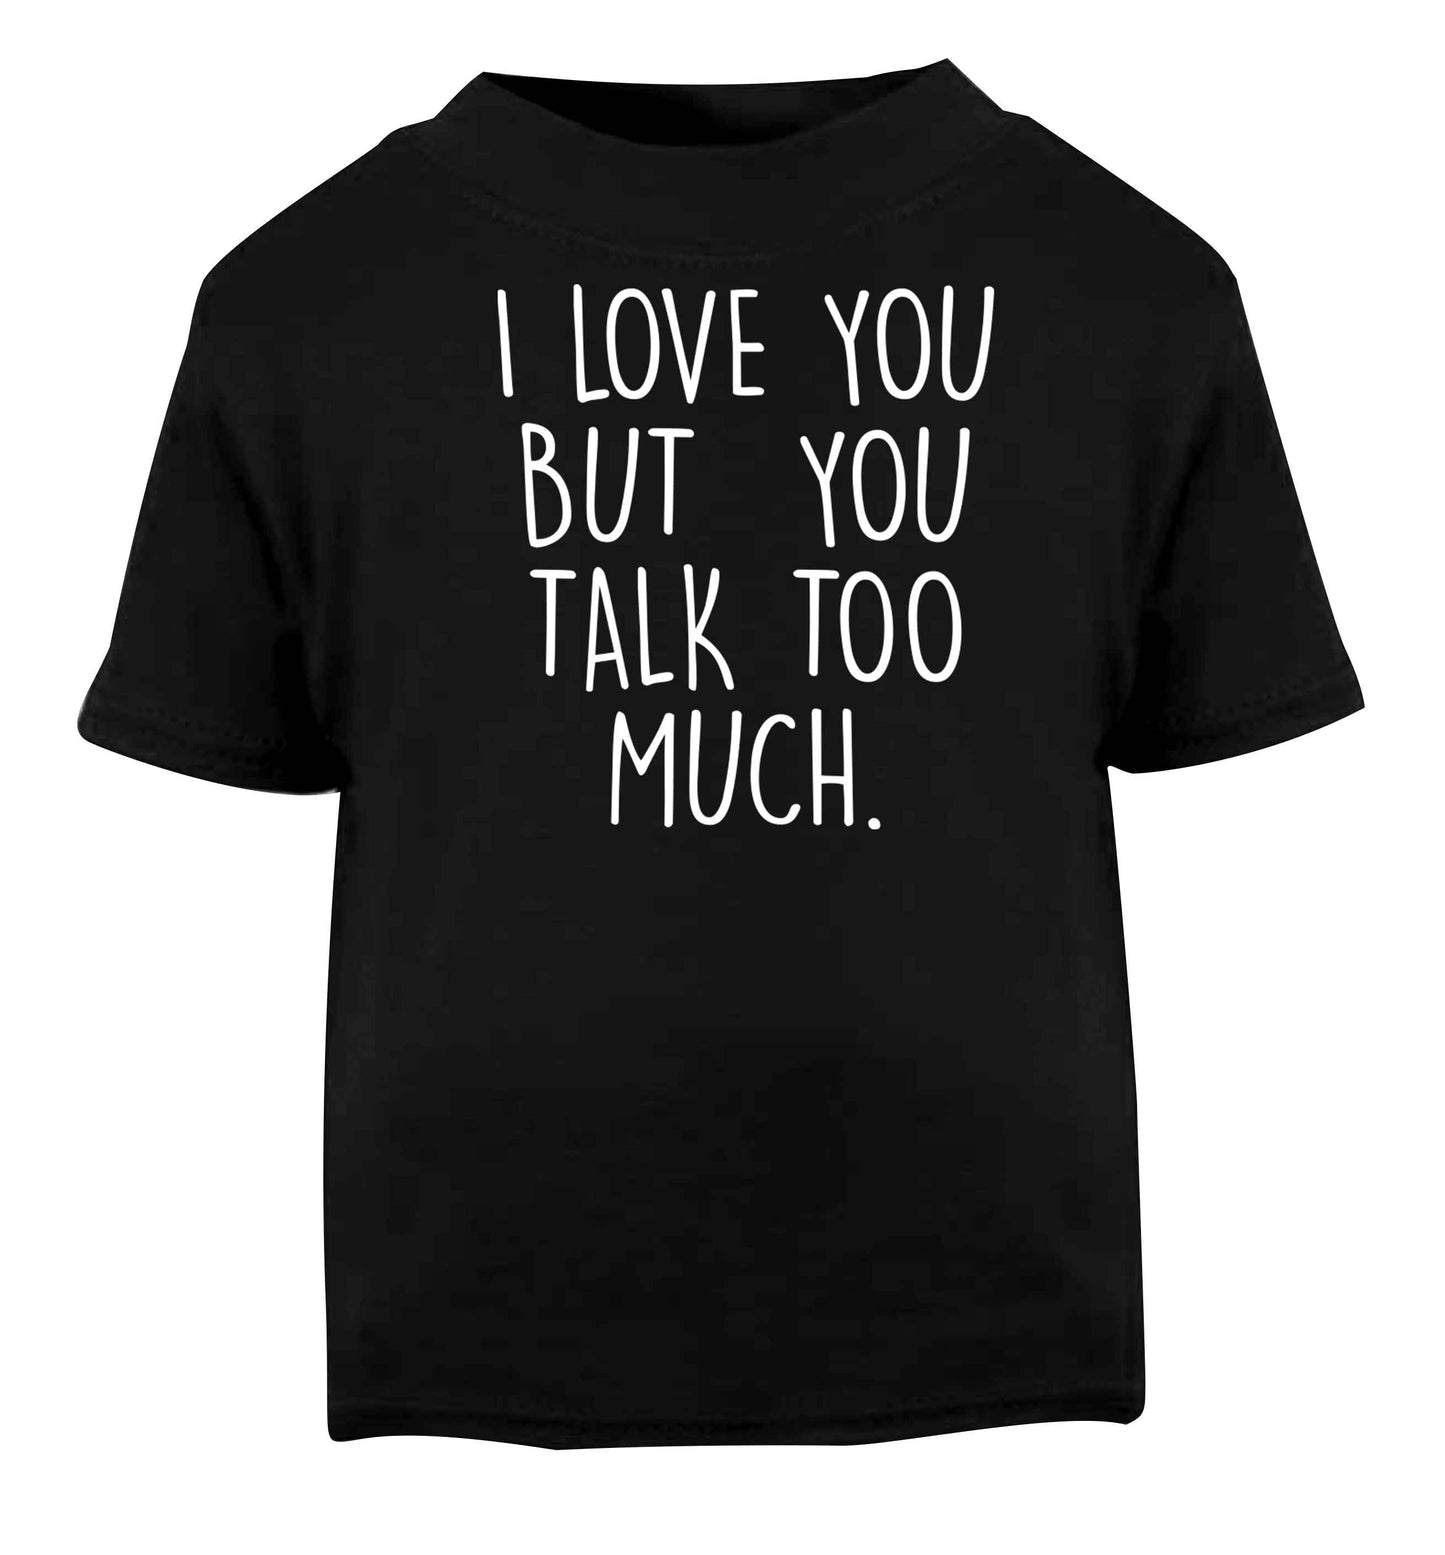 I love you but you talk too much Black baby toddler Tshirt 2 years